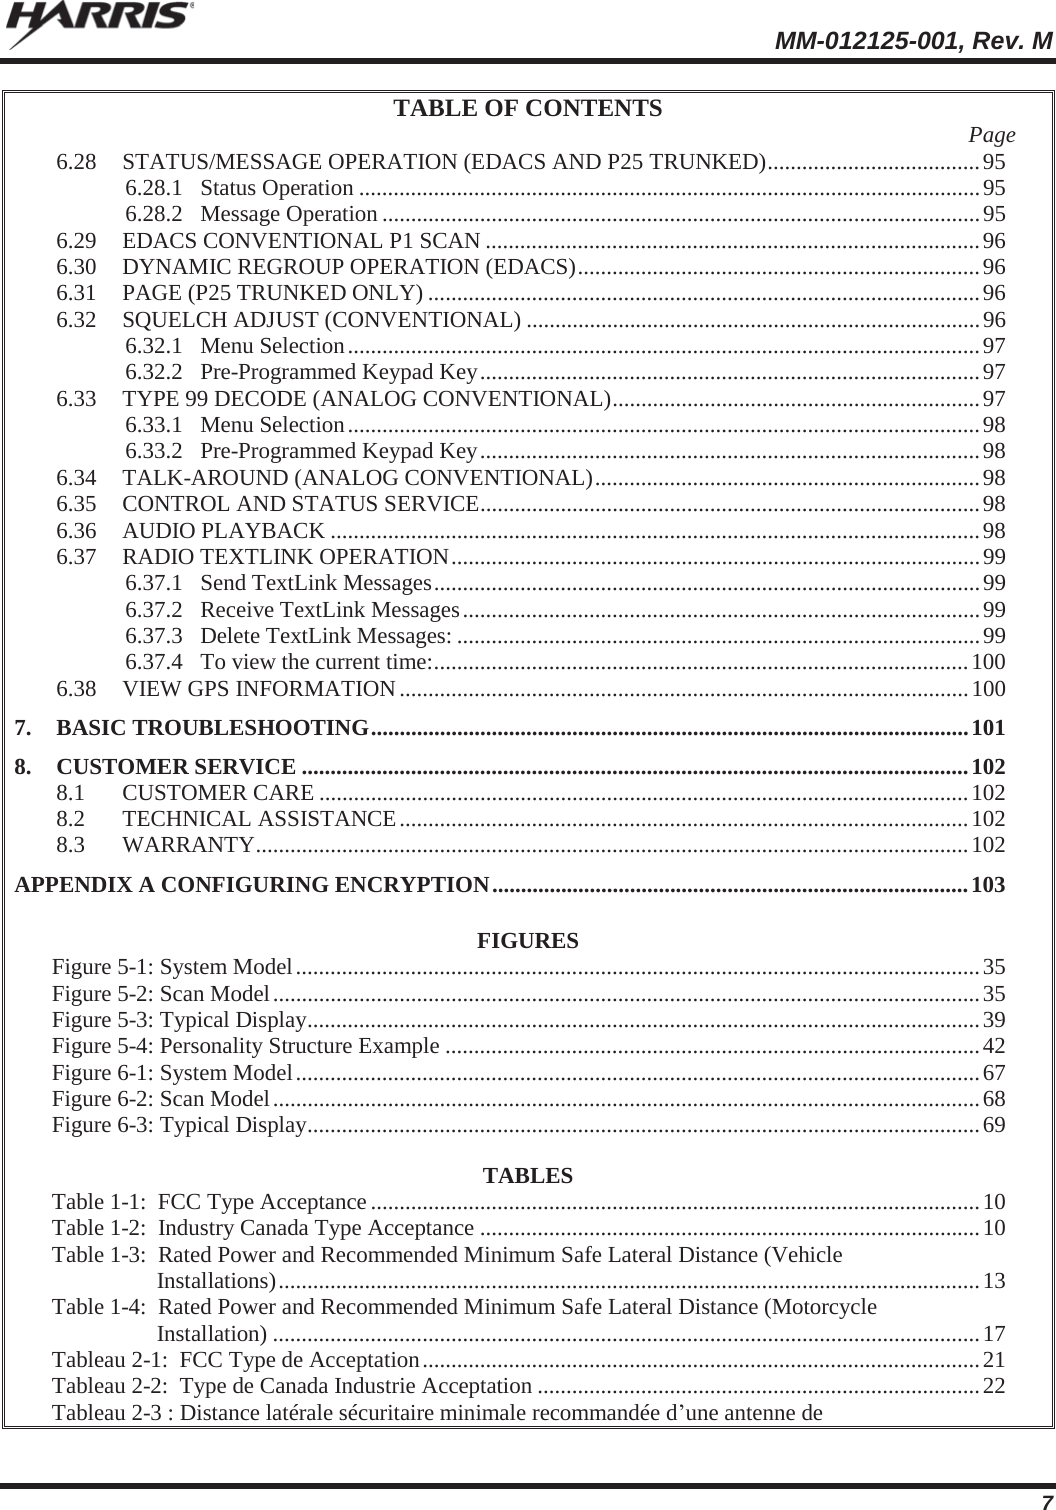  MM-012125-001, Rev. M 7 TABLE OF CONTENTS  Page 6.28 STATUS/MESSAGE OPERATION (EDACS AND P25 TRUNKED) ..................................... 95 6.28.1 Status Operation ............................................................................................................ 95 6.28.2 Message Operation ........................................................................................................ 95 6.29 EDACS CONVENTIONAL P1 SCAN ...................................................................................... 96 6.30 DYNAMIC REGROUP OPERATION (EDACS) ......................................................................  96 6.31 PAGE (P25 TRUNKED ONLY) ................................................................................................ 96 6.32 SQUELCH ADJUST (CONVENTIONAL) ............................................................................... 96 6.32.1 Menu  Selection .............................................................................................................. 97 6.32.2 Pre-Programmed Keypad Key ....................................................................................... 97 6.33 TYPE 99 DECODE (ANALOG CONVENTIONAL)  ................................................................ 97 6.33.1 Menu  Selection .............................................................................................................. 98 6.33.2 Pre-Programmed Keypad Key ....................................................................................... 98 6.34 TALK-AROUND (ANALOG CONVENTIONAL) ...................................................................  98 6.35 CONTROL AND STATUS SERVICE ....................................................................................... 98 6.36 AUDIO PLAYBACK ................................................................................................................. 98 6.37 RADIO TEXTLINK OPERATION ............................................................................................ 99 6.37.1 Send TextLink Messages ............................................................................................... 99 6.37.2 Receive TextLink Messages .......................................................................................... 99 6.37.3 Delete TextLink Messages: ........................................................................................... 99 6.37.4 To view the current time: ............................................................................................. 100 6.38 VIEW GPS INFORMATION ................................................................................................... 100 7. BASIC TROUBLESHOOTING ........................................................................................................ 101 8. CUSTOMER SERVICE .................................................................................................................... 102 8.1 CUSTOMER CARE ................................................................................................................. 102 8.2 TECHNICAL  ASSISTANCE ................................................................................................... 102 8.3 WARRANTY ............................................................................................................................ 102 APPENDIX A CONFIGURING ENCRYPTION ................................................................................... 103  FIGURES Figure 5-1: System Model ....................................................................................................................... 35 Figure 5-2: Scan Model ........................................................................................................................... 35 Figure 5-3: Typical Display ..................................................................................................................... 39 Figure 5-4: Personality Structure Example ............................................................................................. 42 Figure 6-1: System Model ....................................................................................................................... 67 Figure 6-2: Scan Model ........................................................................................................................... 68 Figure 6-3: Typical Display ..................................................................................................................... 69  TABLES Table 1-1:  FCC Type Acceptance .......................................................................................................... 10 Table 1-2:  Industry Canada Type Acceptance ....................................................................................... 10 Table 1-3:  Rated Power and Recommended Minimum Safe Lateral Distance (Vehicle Installations) .......................................................................................................................... 13 Table 1-4:  Rated Power and Recommended Minimum Safe Lateral Distance (Motorcycle Installation) ........................................................................................................................... 17 Tableau 2-1:  FCC Type de Acceptation ................................................................................................. 21 Tableau 2-2:  Type de Canada Industrie Acceptation ............................................................................. 22 Tableau 2-3 : Distance latérale sécuritaire minimale recommandée d’une antenne de 